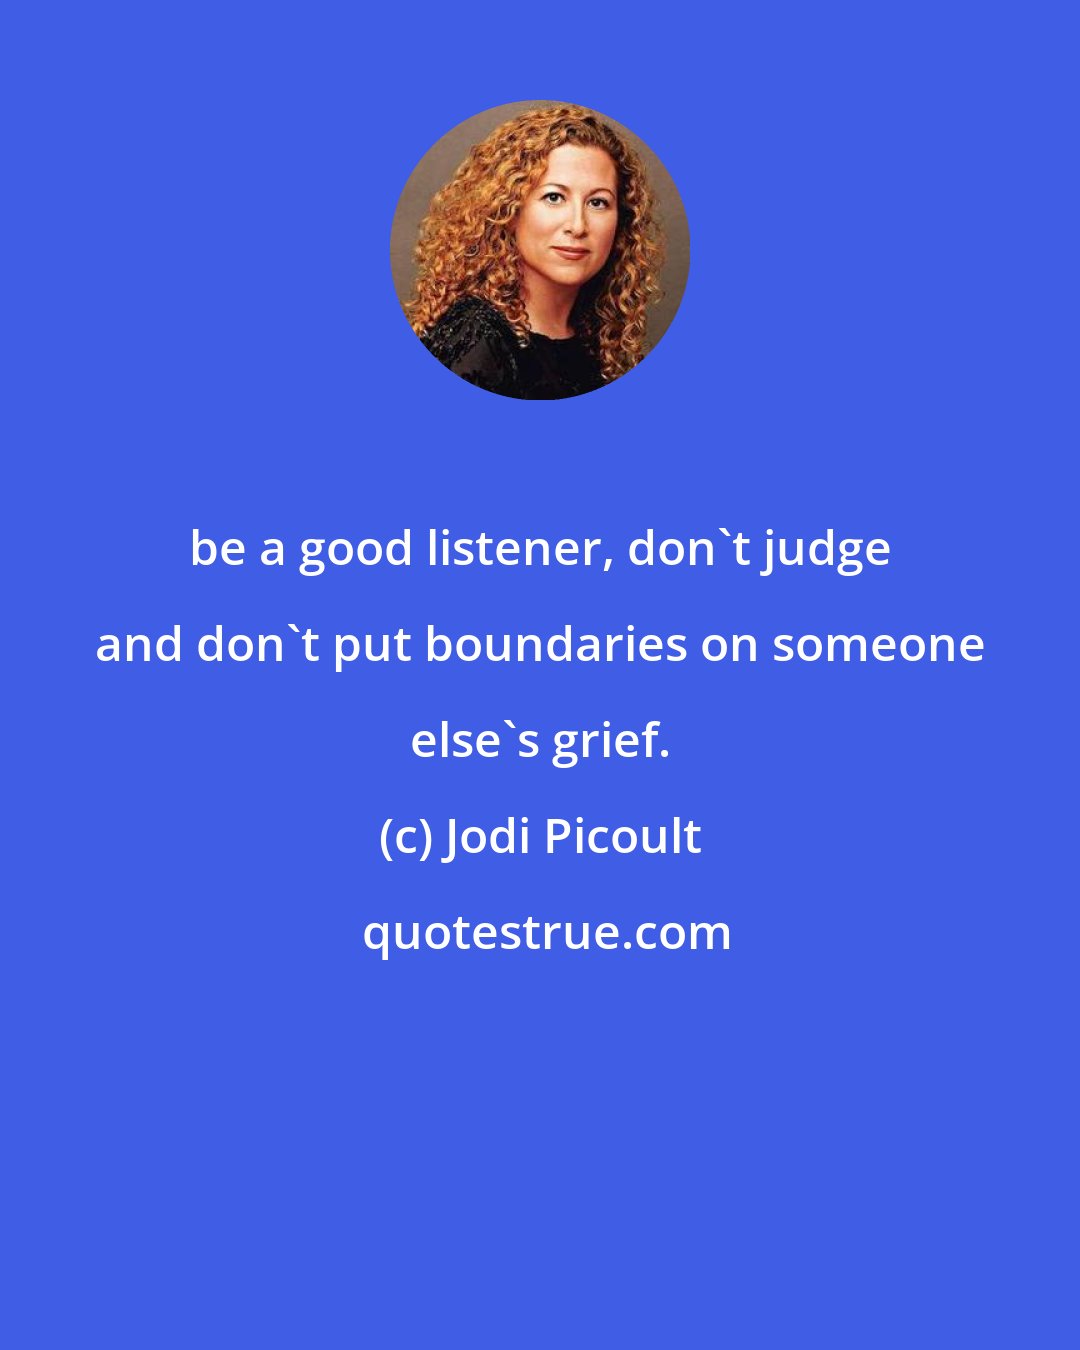 Jodi Picoult: be a good listener, don't judge and don't put boundaries on someone else's grief.